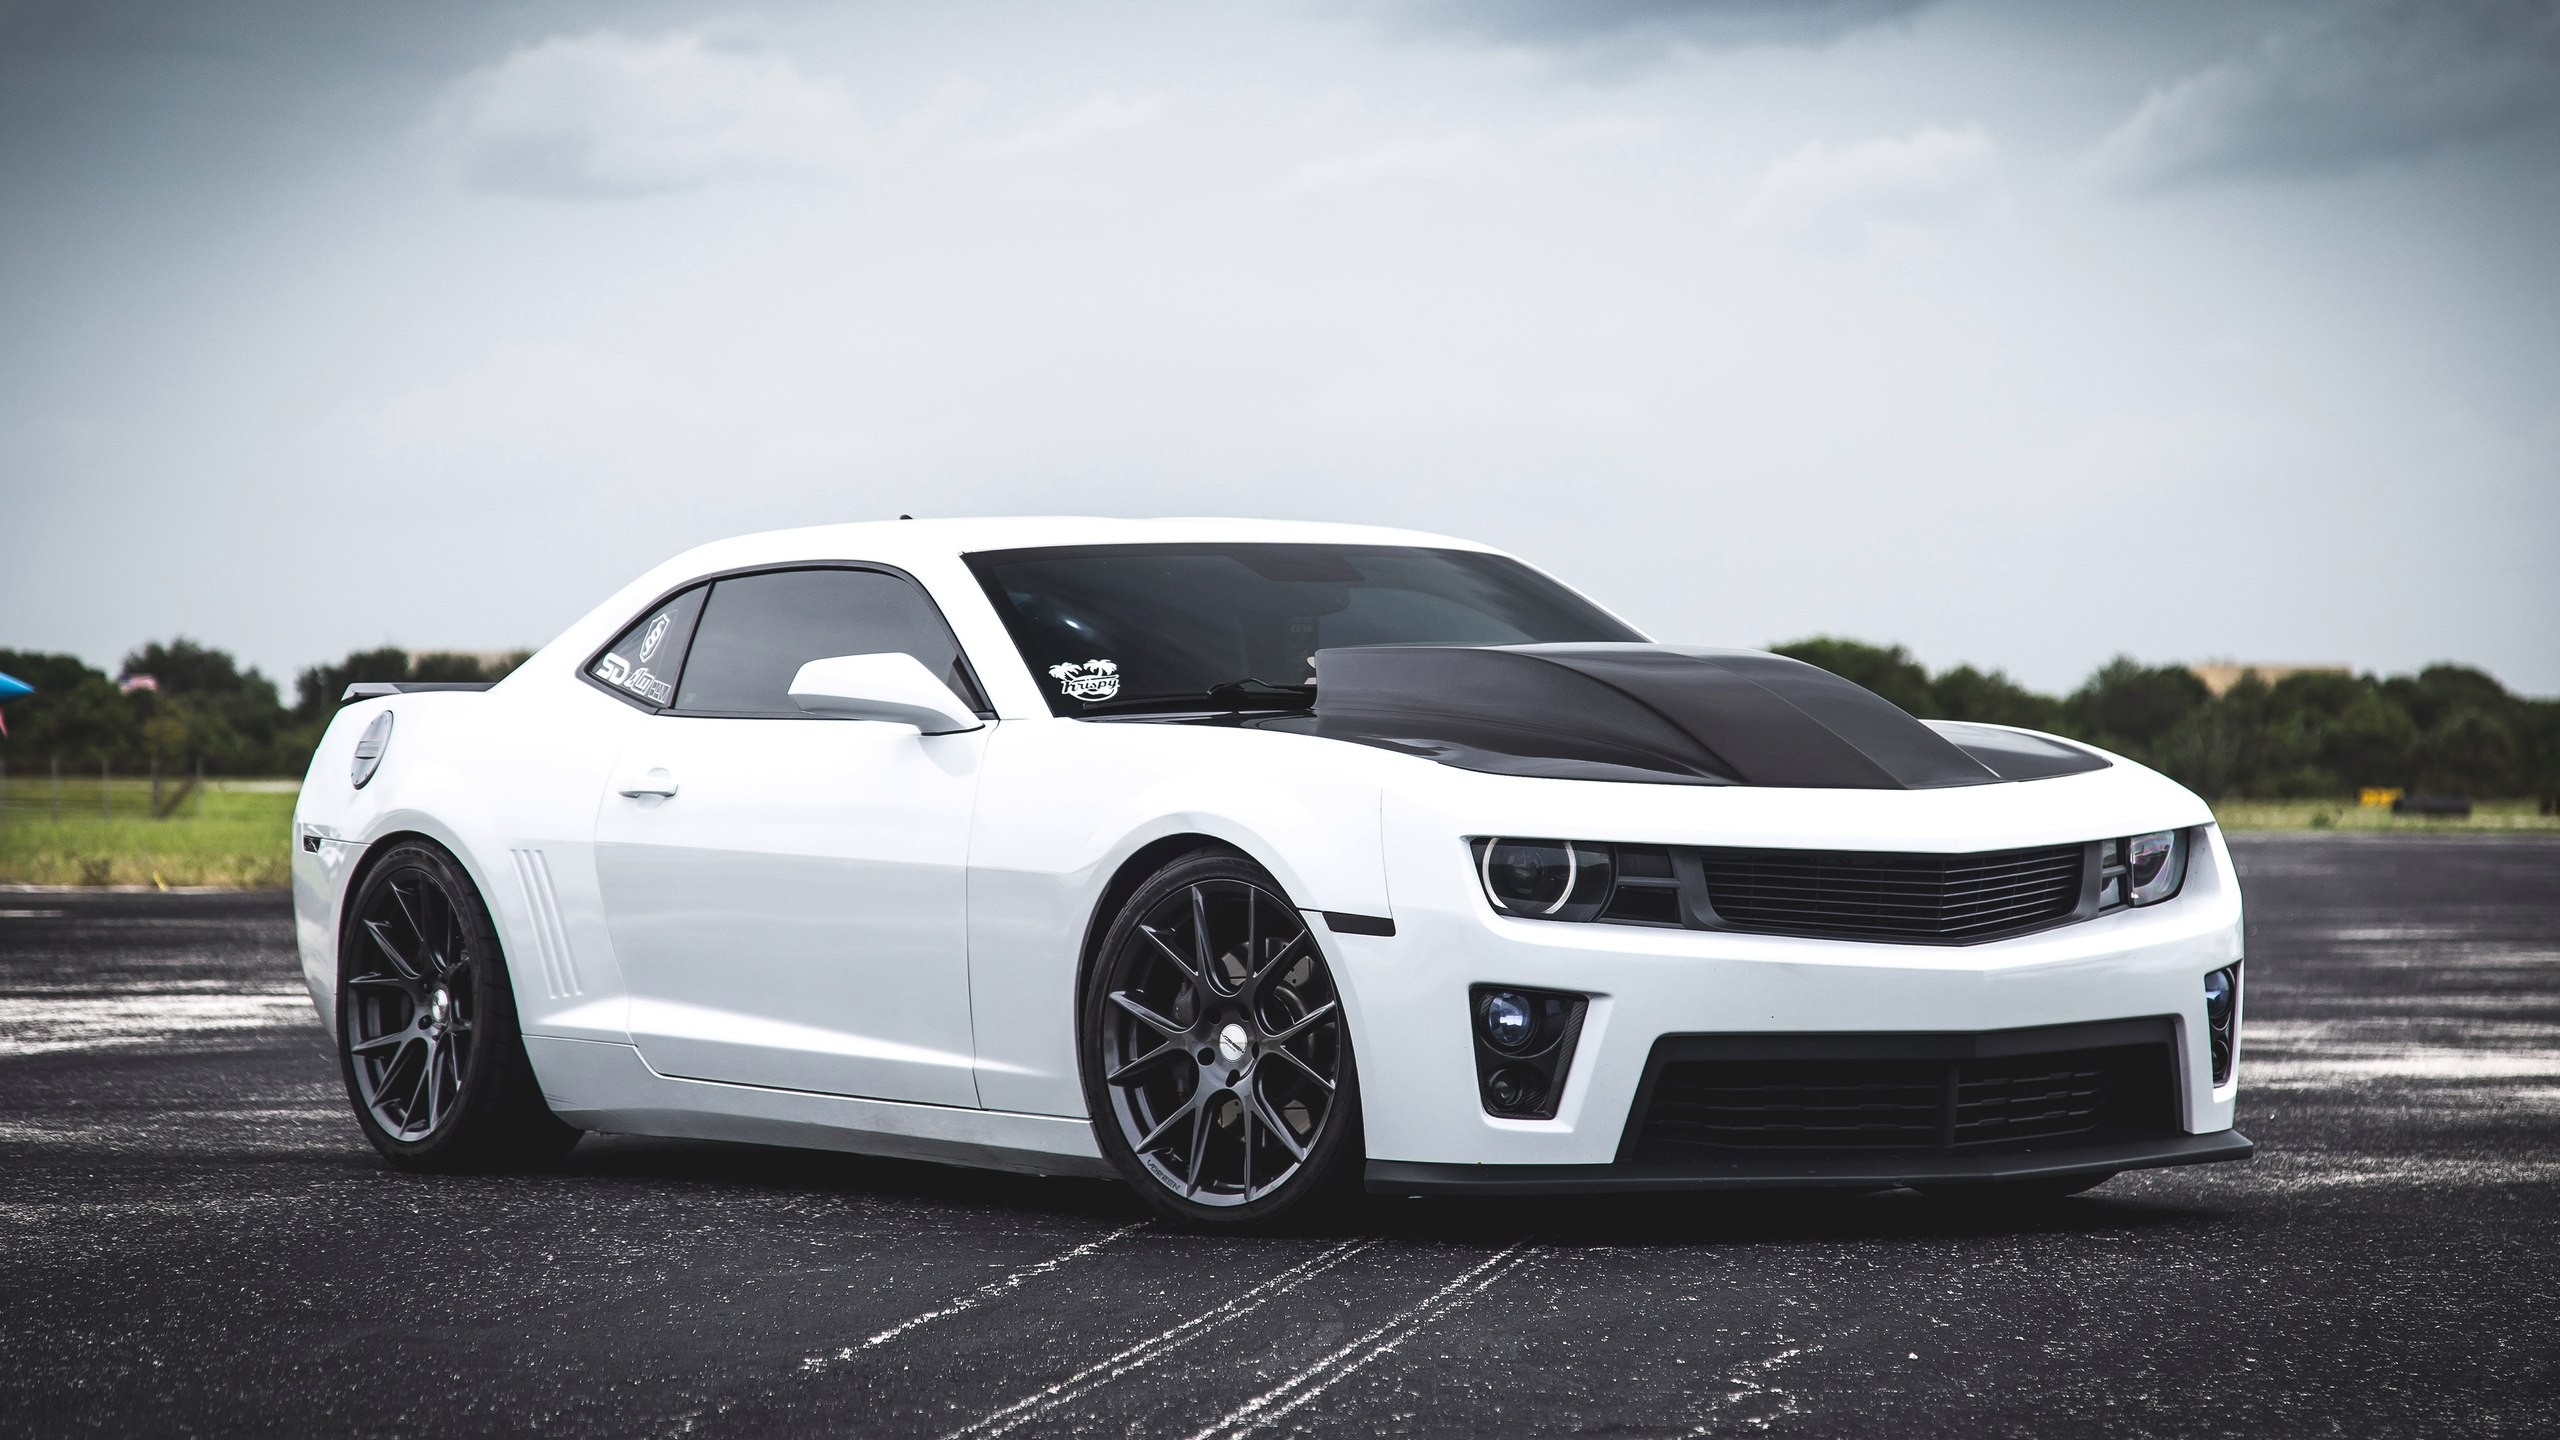 General 2560x1440 car Chevrolet Camaro SS tuning Chevrolet muscle cars American cars